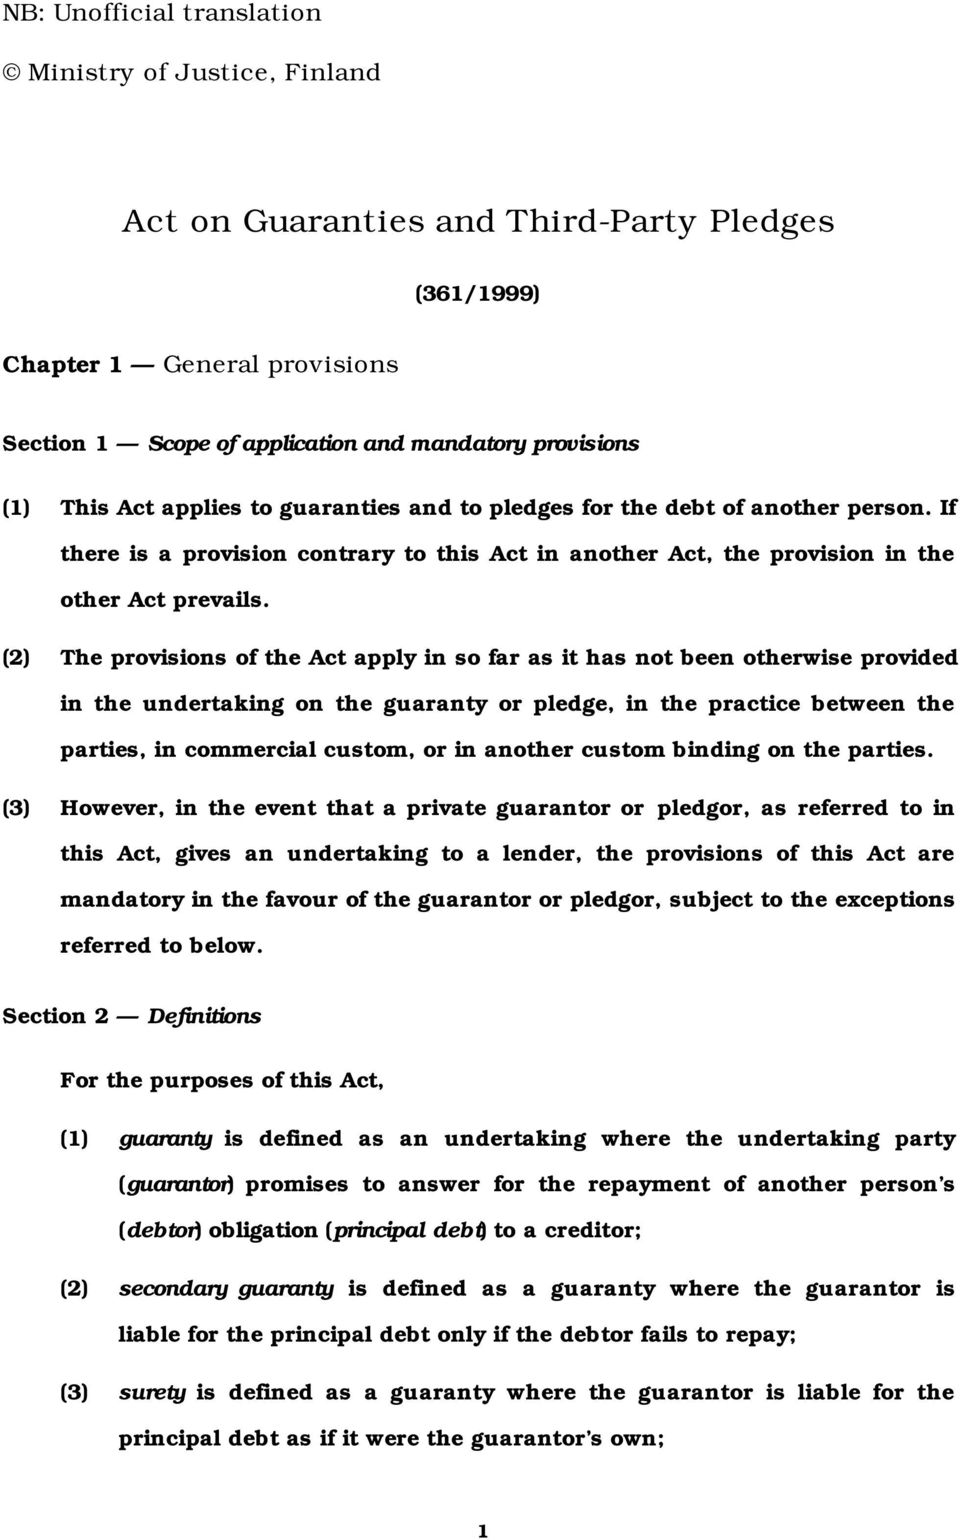 (2) The provisions of the Act apply in so far as it has not been otherwise provided in the undertaking on the guaranty or pledge, in the practice between the parties, in commercial custom, or in